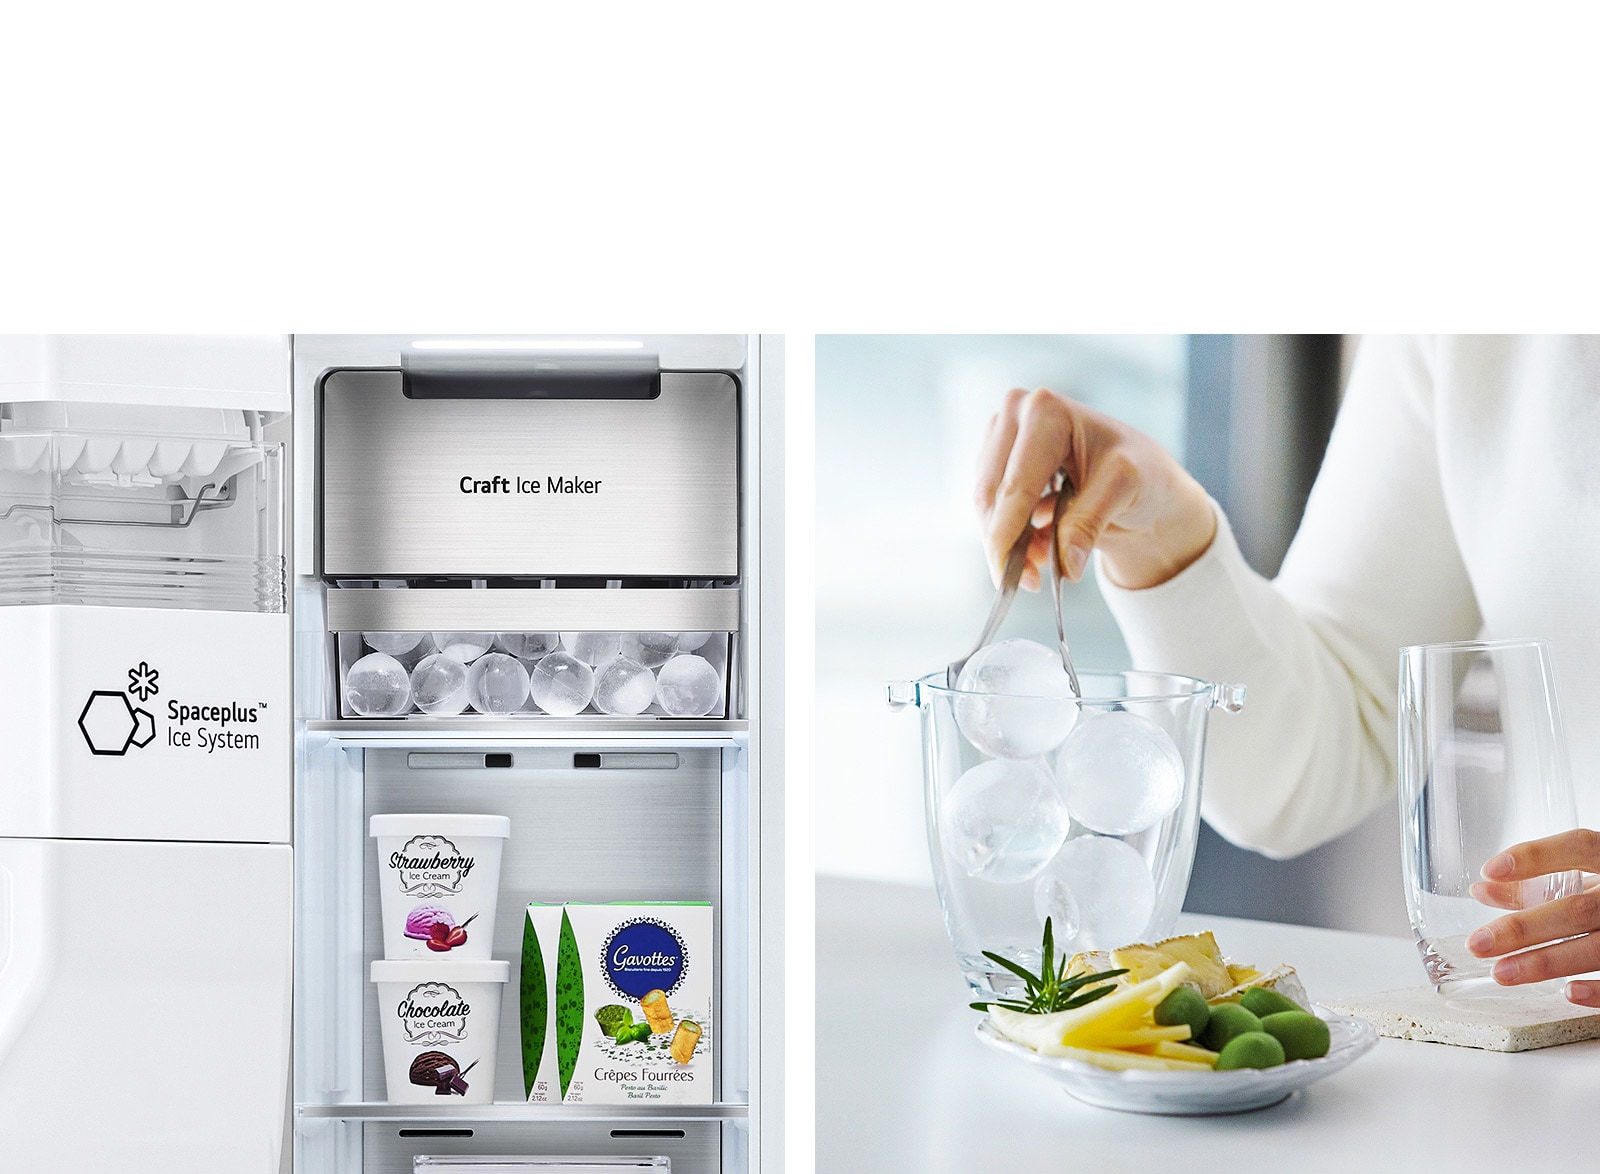 Two images are next to each other. The image on the left shows the inside of the freezer stocked with ice cream and the Craft Ice Maker on top with perfectly round ice cubes in the drawer. The image on the right shows a hand using tongs to grab round ice cubes to put in a class.